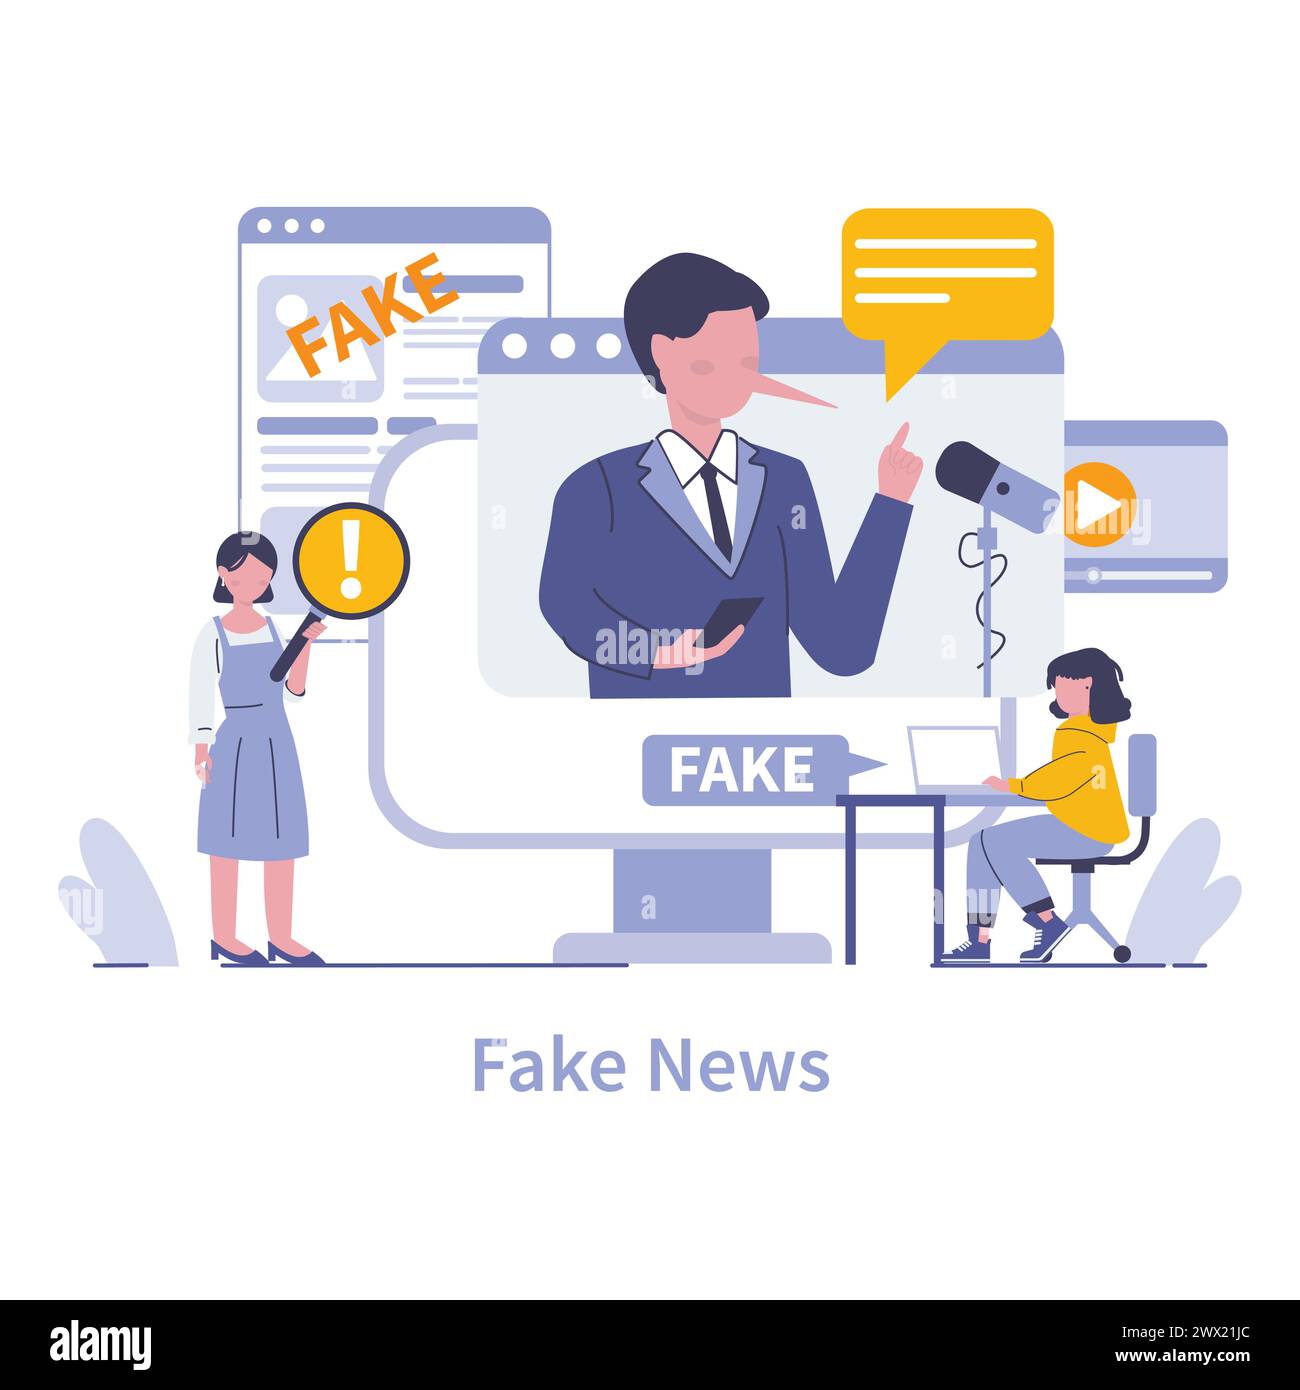 Fake News concept. The spread of misinformation through digital media highlighted with cautionary symbols and skeptical characters. Vector illustration. Stock Vector